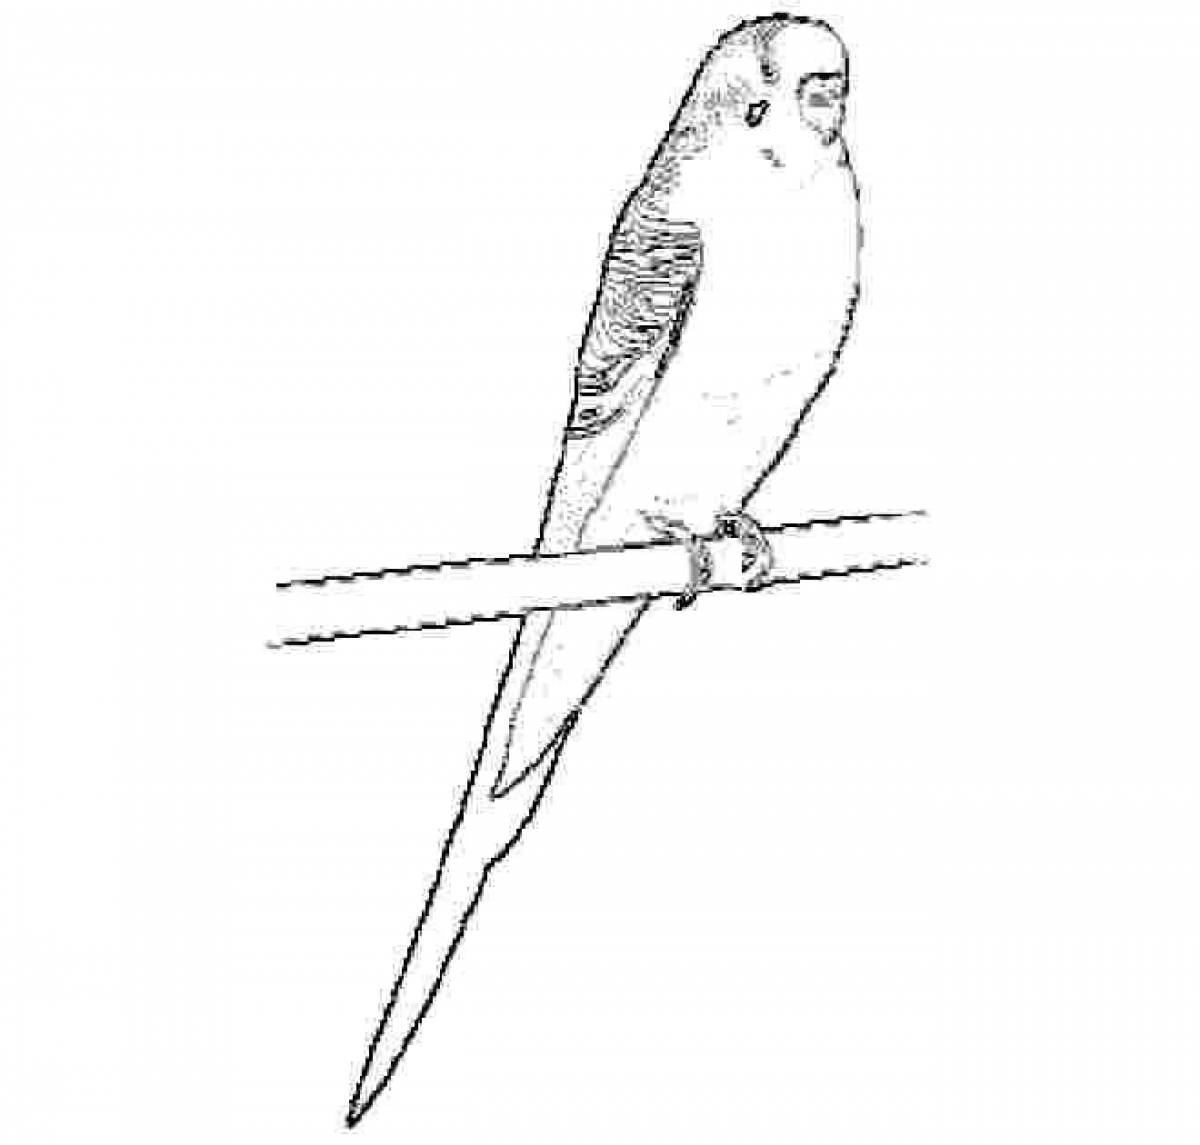 Cute budgie coloring page